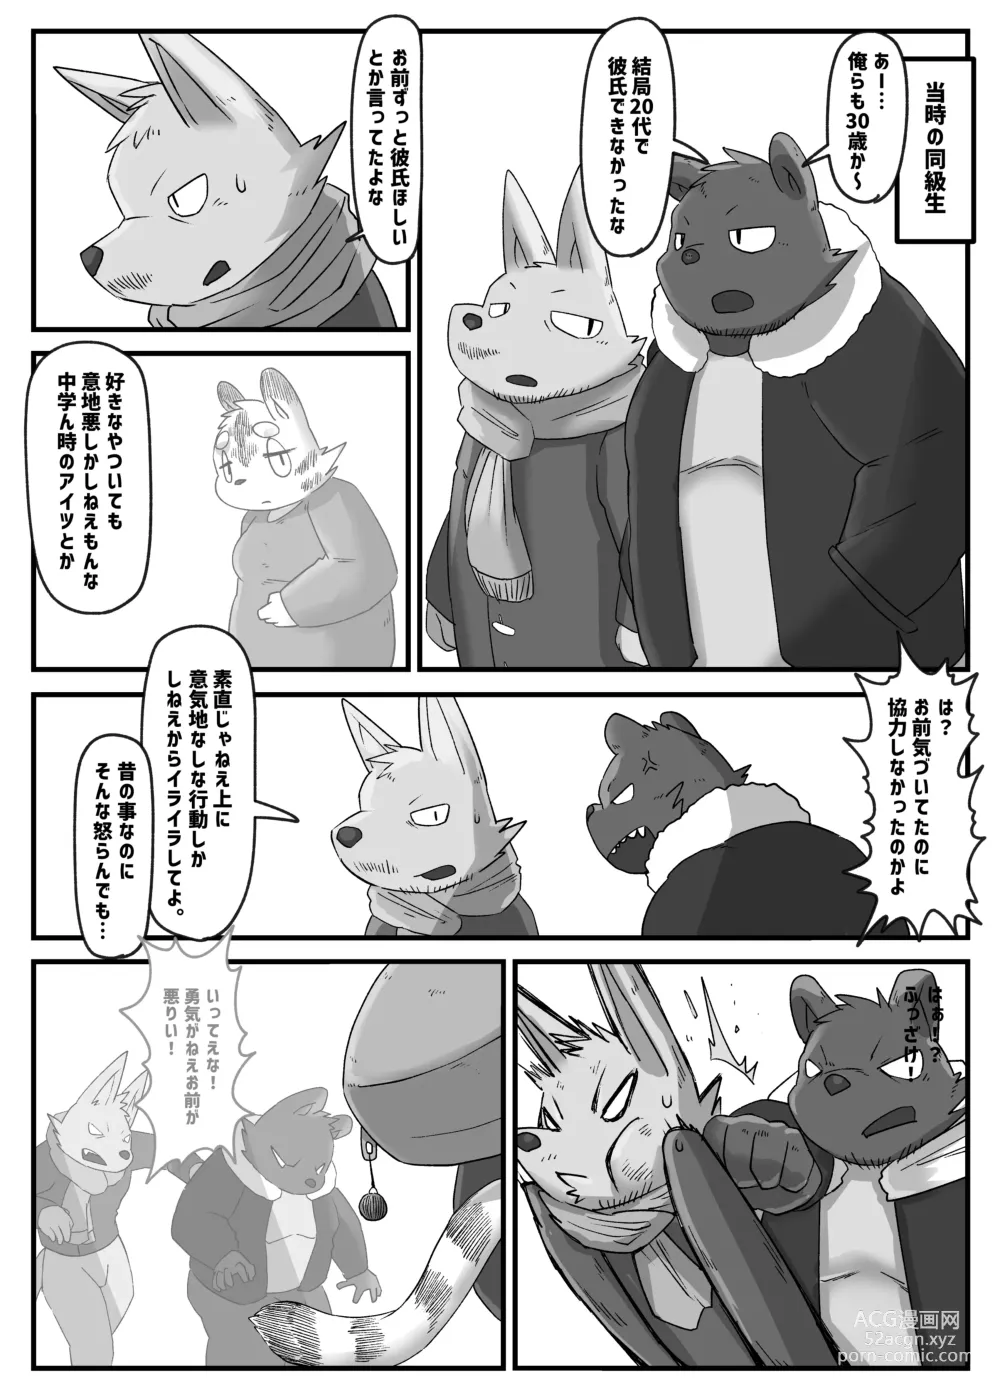 Page 21 of doujinshi Muscular Bull Teacher & Chubby Tiger Student 5